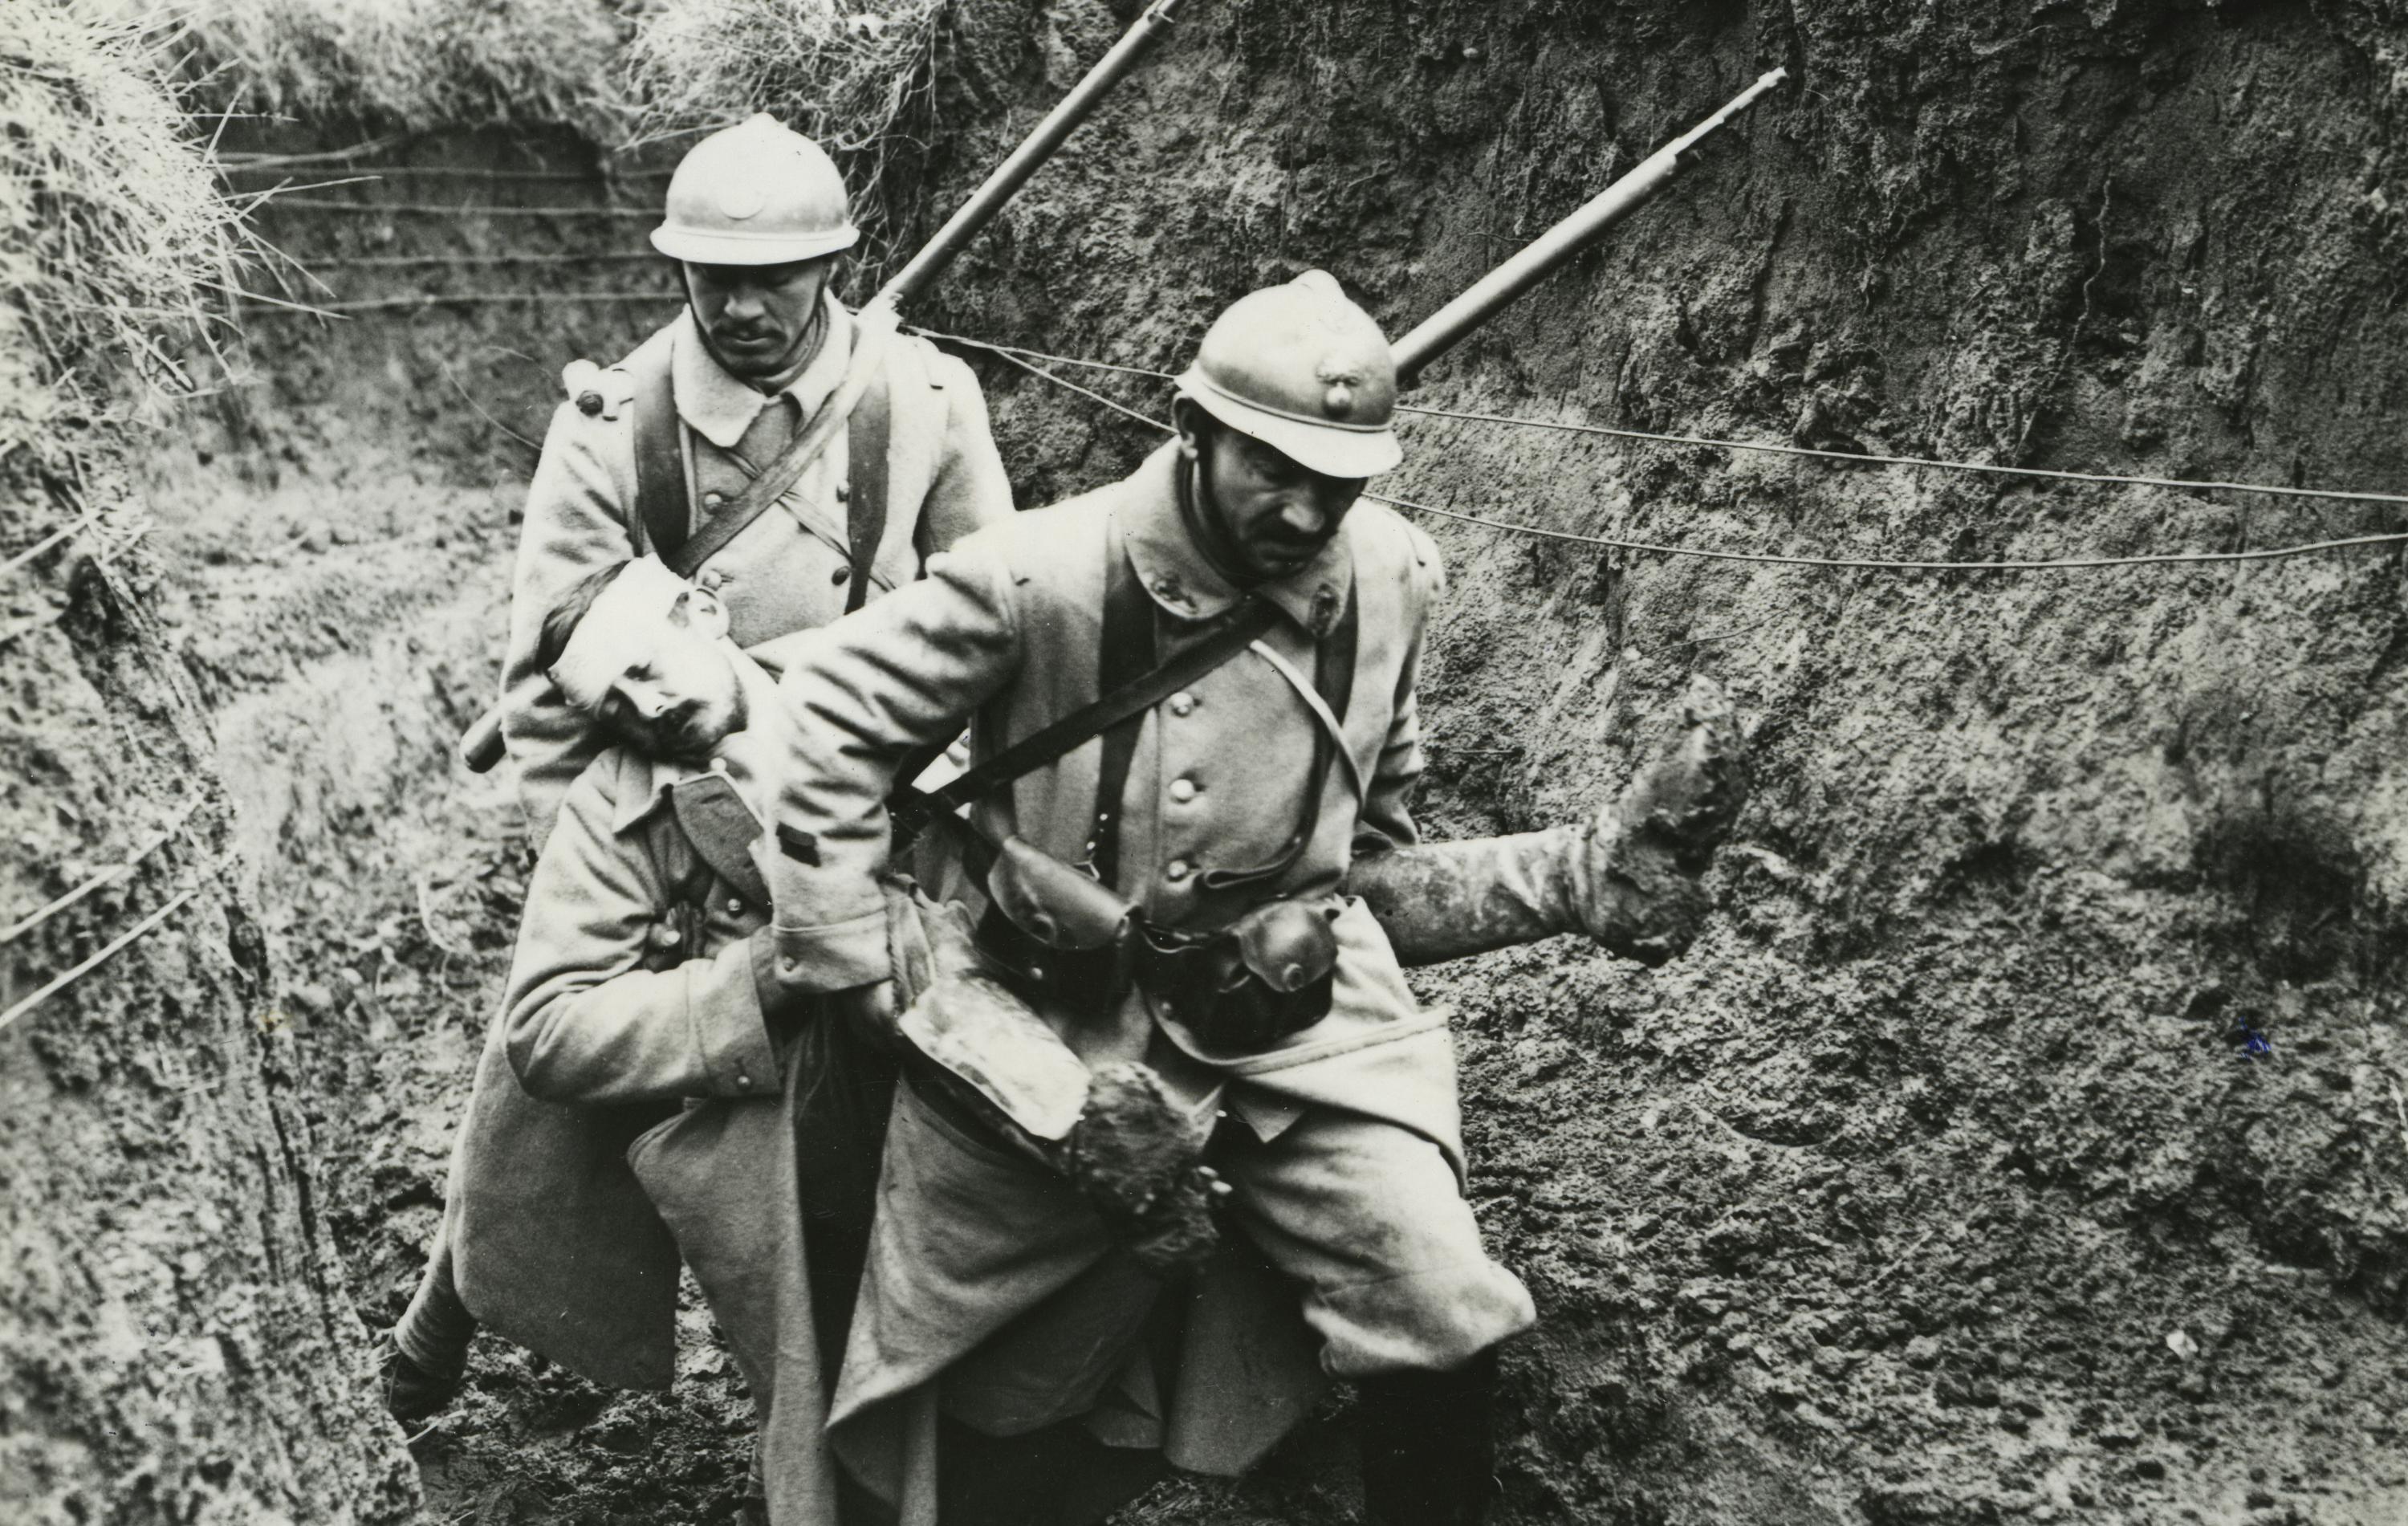 Medical assistance in the Great War and the everyday life of french soldiers